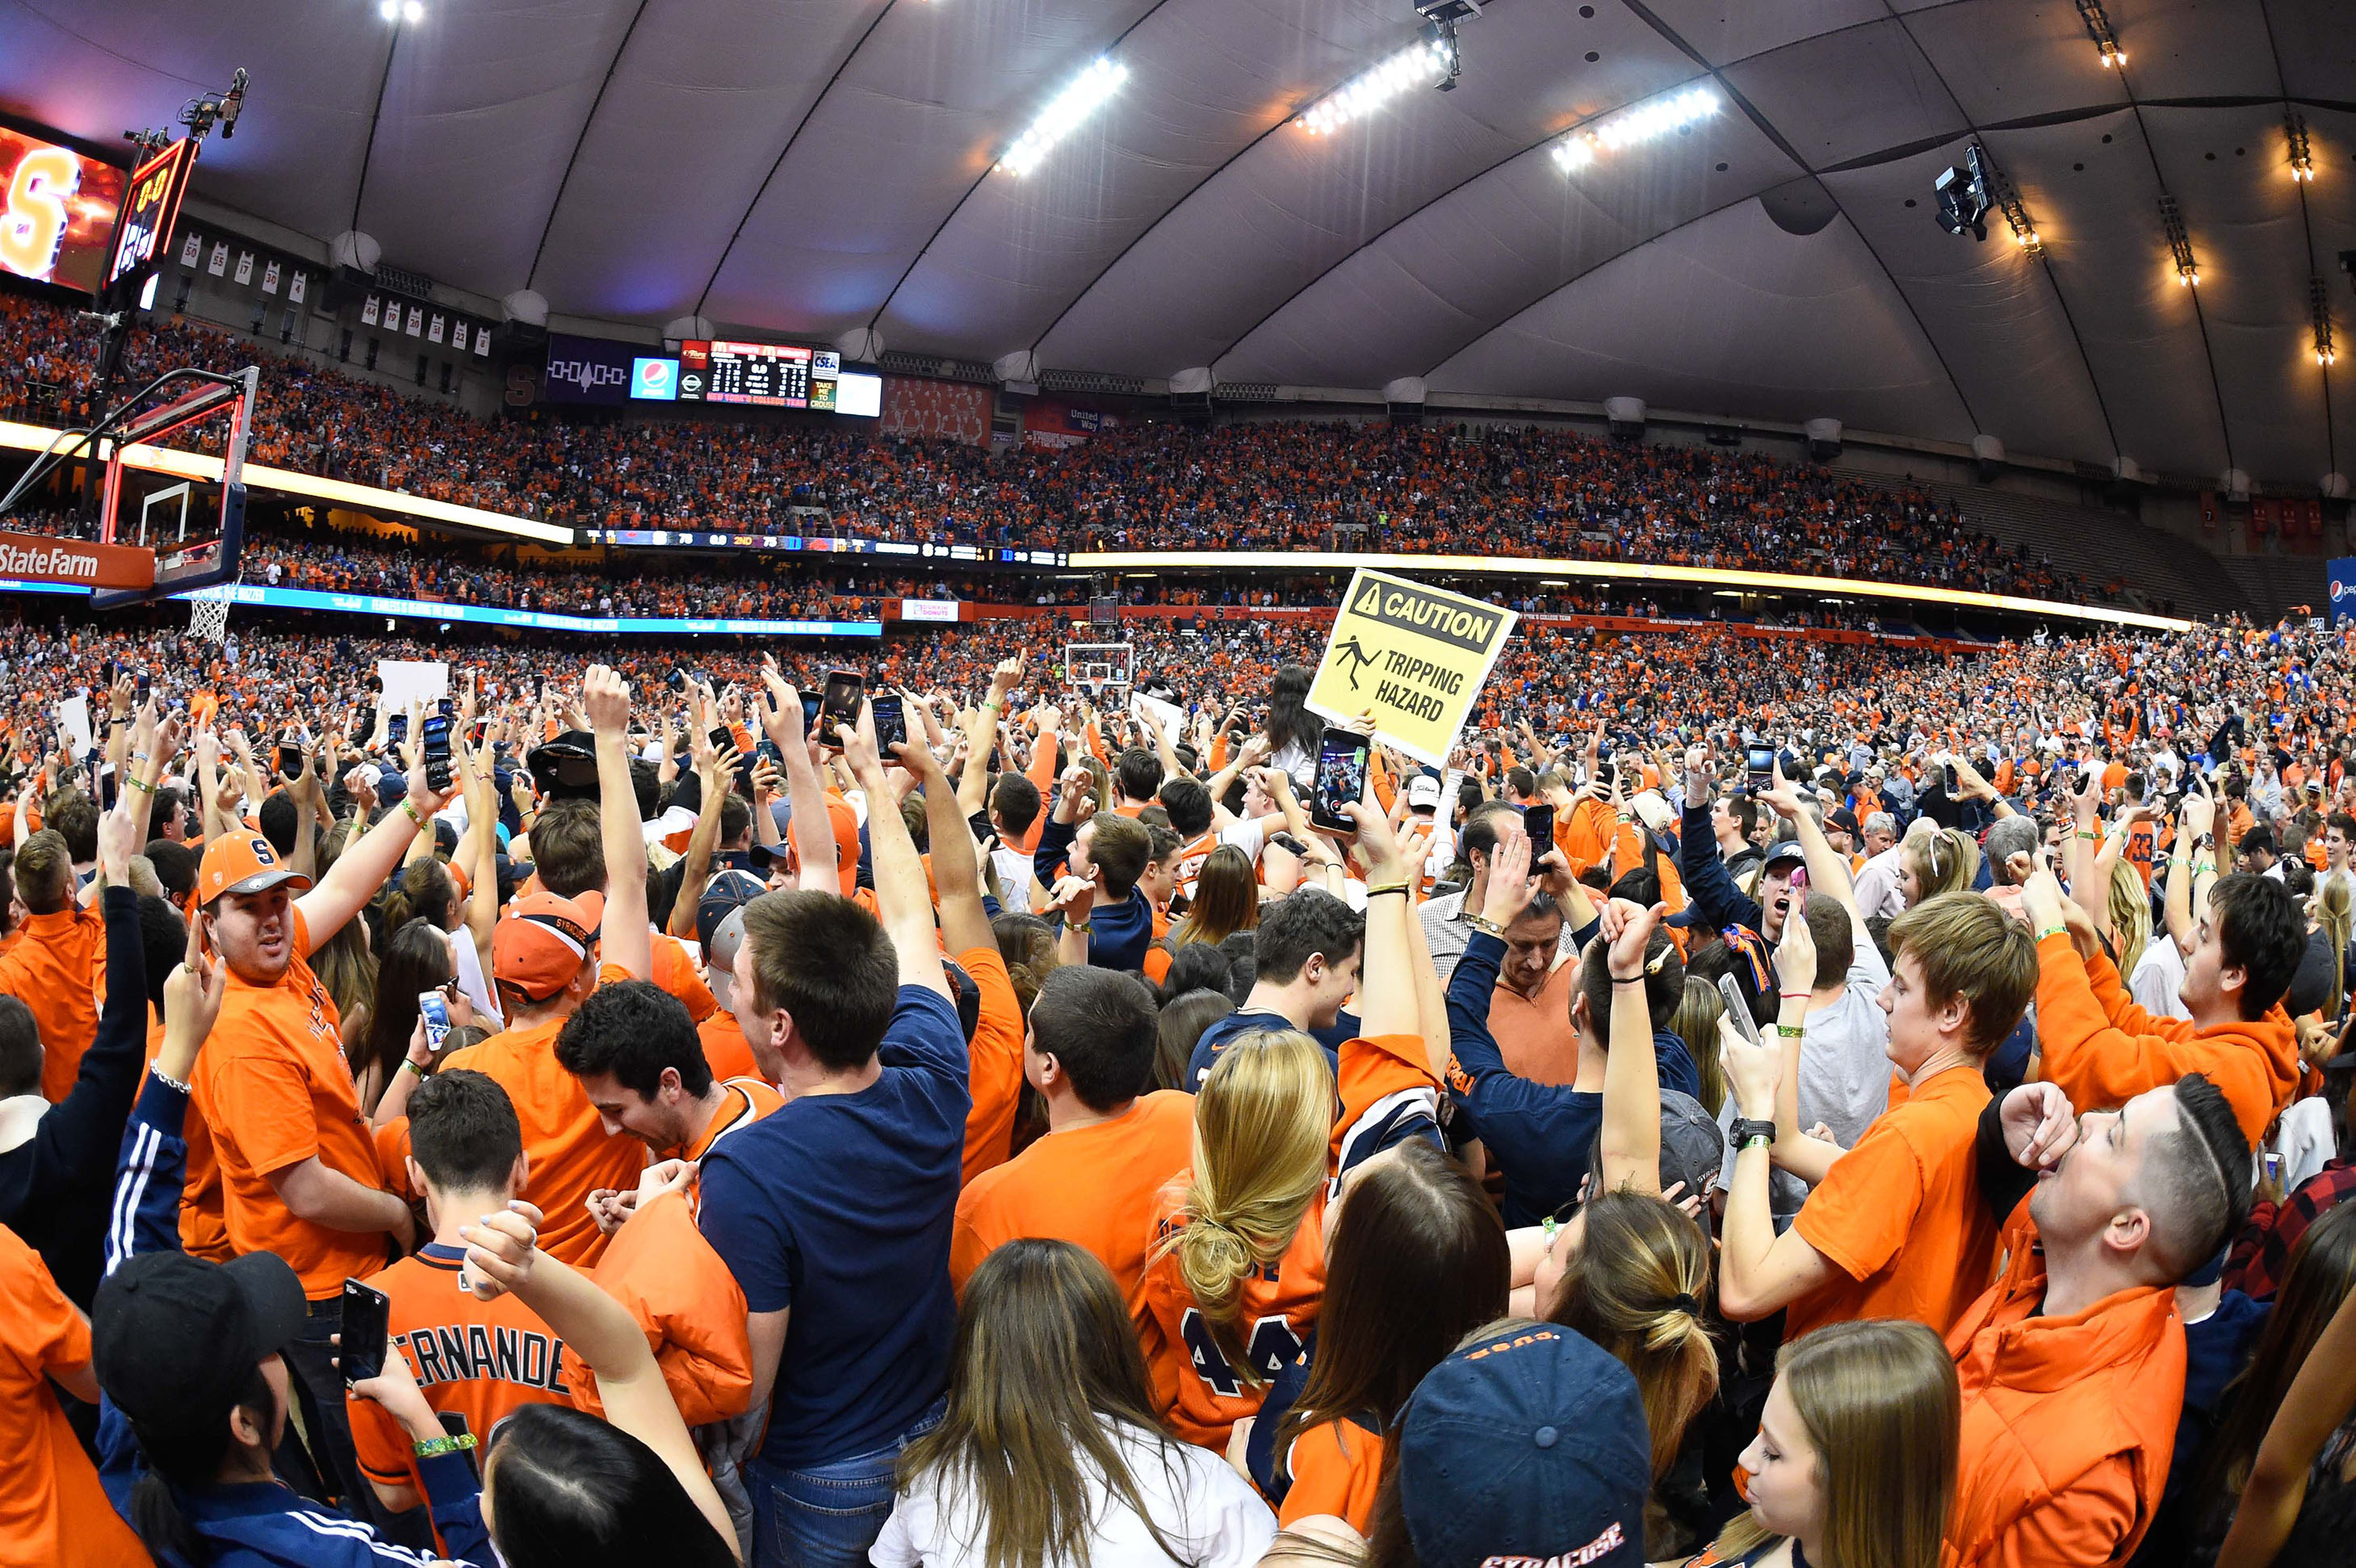 Feb 22, 2017; Syracuse, NY, USA; Syracuse Orange fans celebrate on the court following the game against the Duke Blue Devils at the Carrier Dome. The Orange won 78-75. Mandatory Credit: Rich Barnes-USA TODAY Sports ORG XMIT: USATSI-336548 ORIG FILE ID:  20170222_gma_ai8_080.jpg